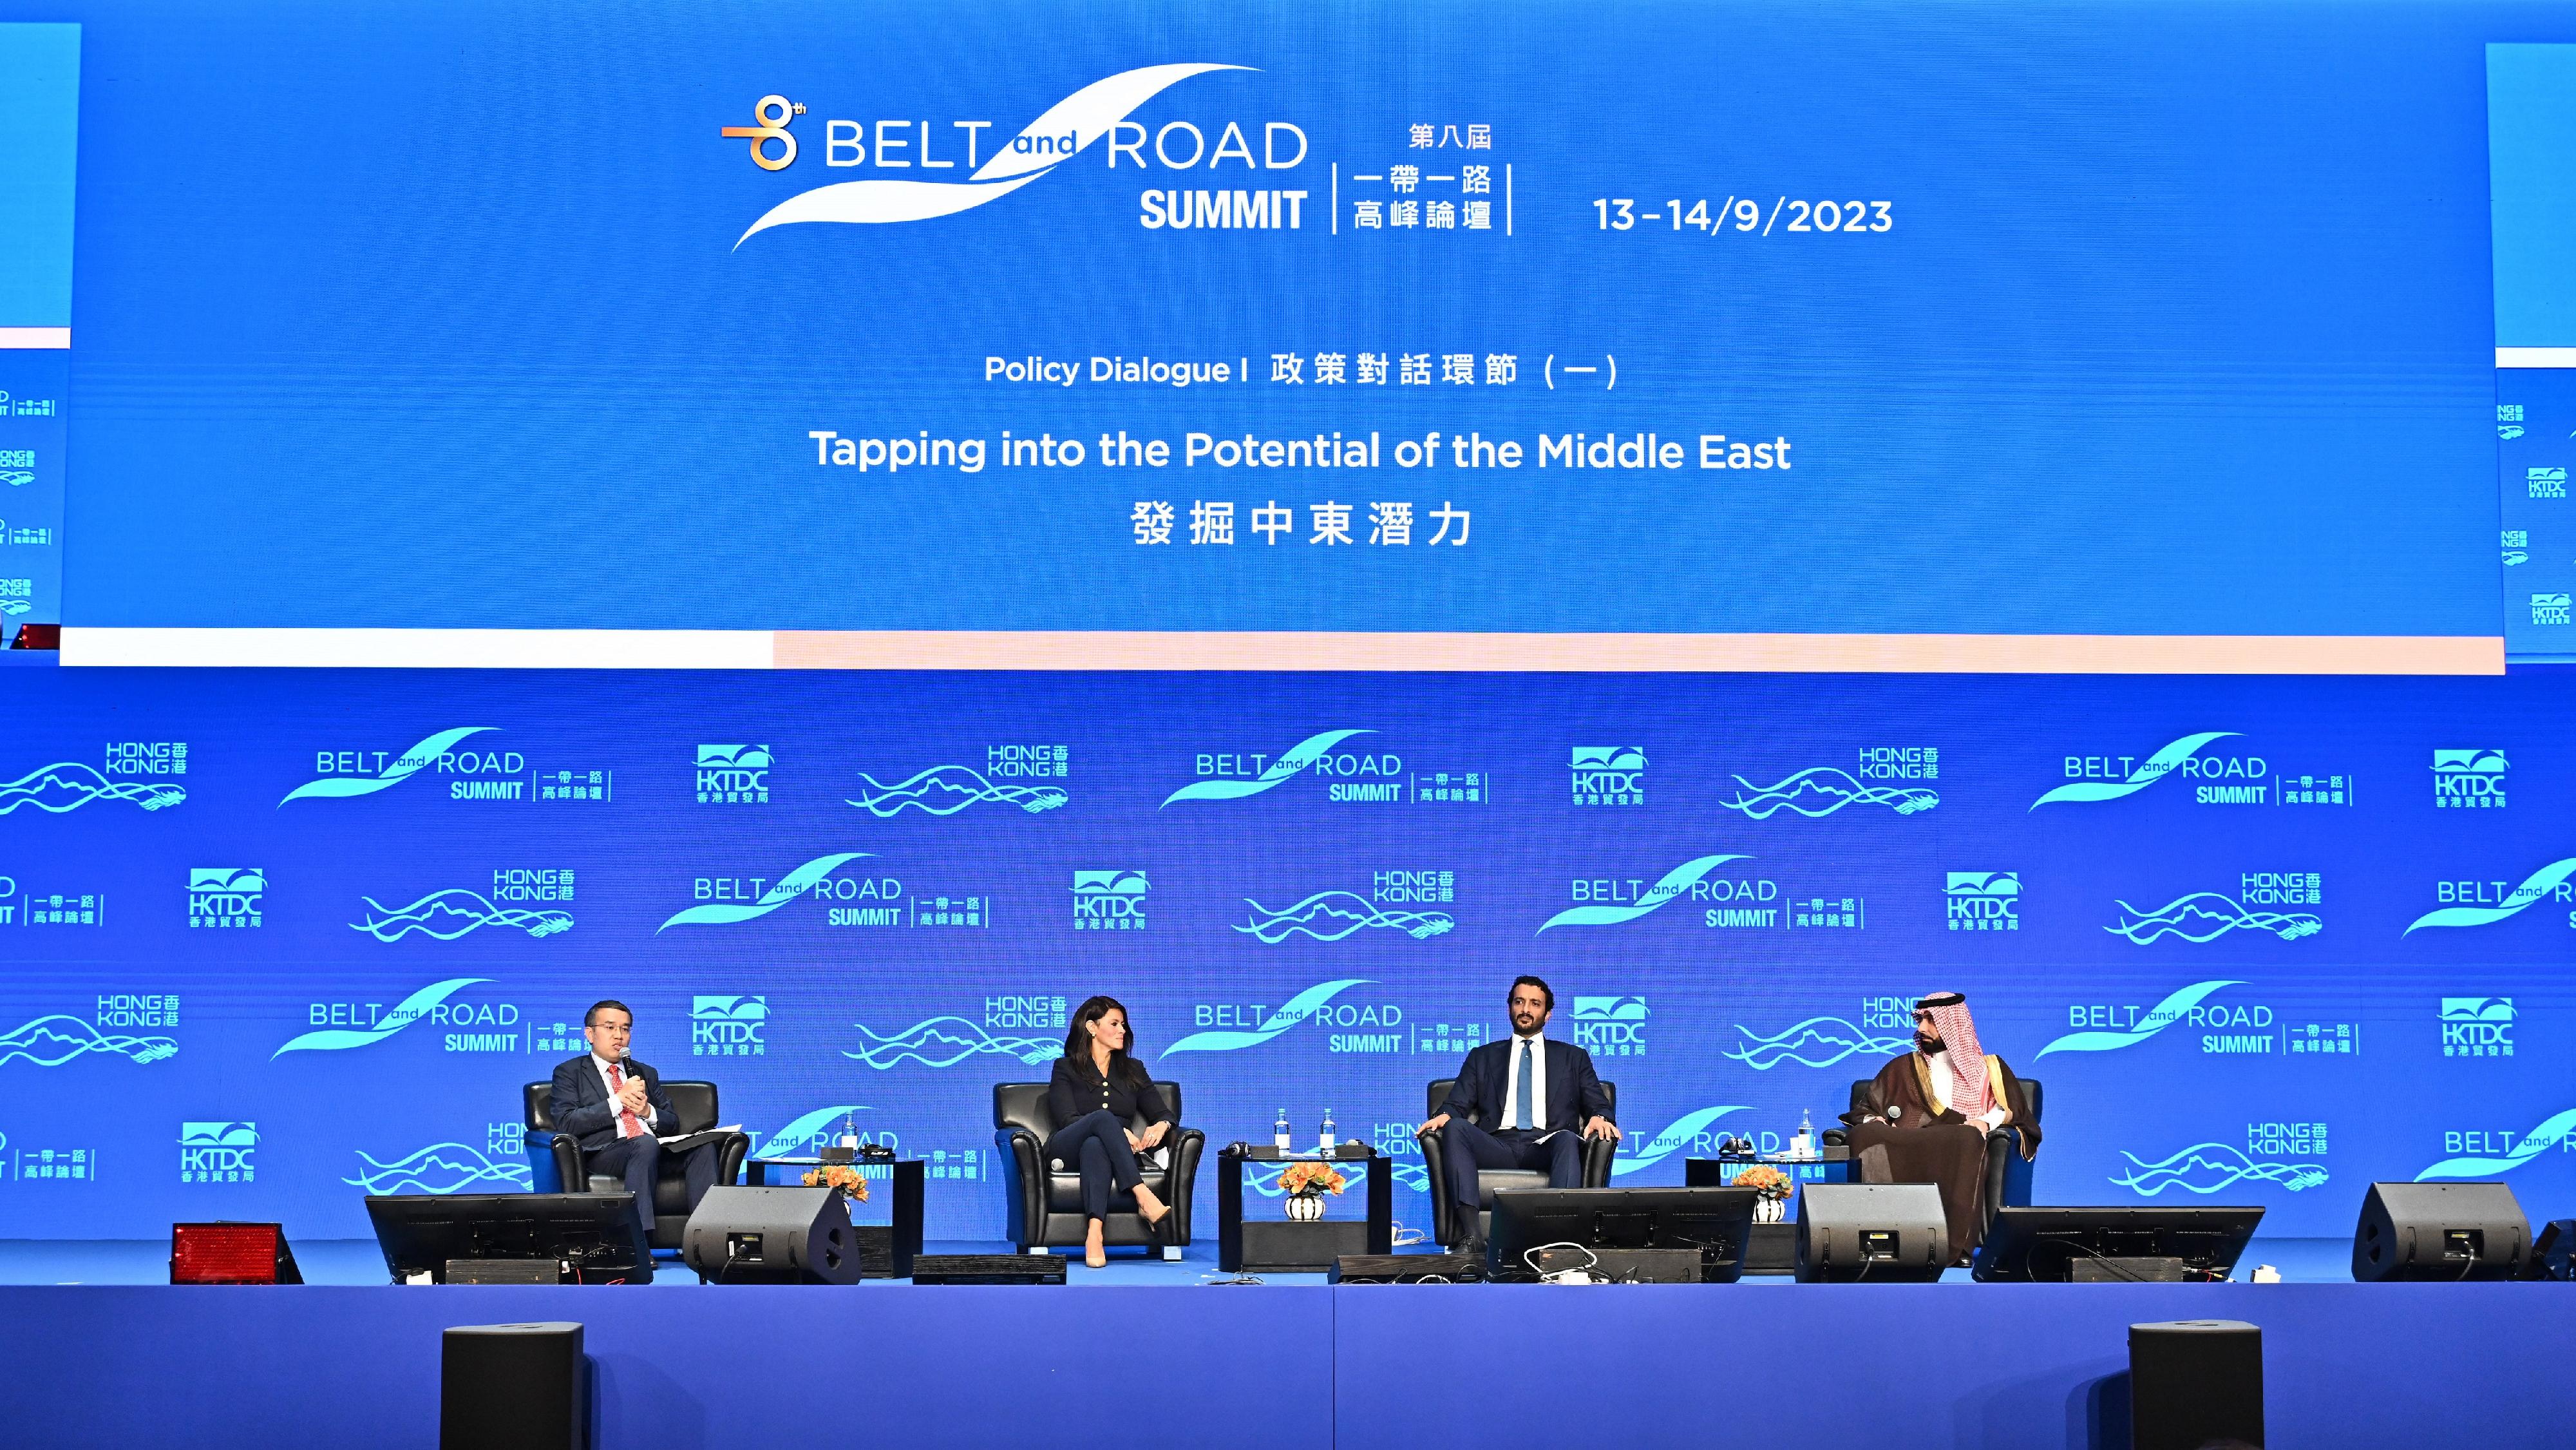 The eighth Belt and Road Summit opened today (September 13). The Secretary for Financial Services and the Treasury, Mr Christopher Hui (first left), chaired the policy dialogue session titled "Tapping into the Potential of the Middle East" to explore effective ways to tap the Middle East markets, fostering complementarity, mutual benefits and collective development. The Advisor of the General Secretariat of the Council of Ministers, Saudi Arabia, Mr Fahd bin Abdulmohsan Al-Rasheed (first right); the Minister of Economy of the United Arab Emirates, Mr Abdulla Bin Touq Al Marri (second right); and the Minister, Ministry of International Cooperation, Egypt, Dr Rania A Al-Mashat (second left), joined the discussion.